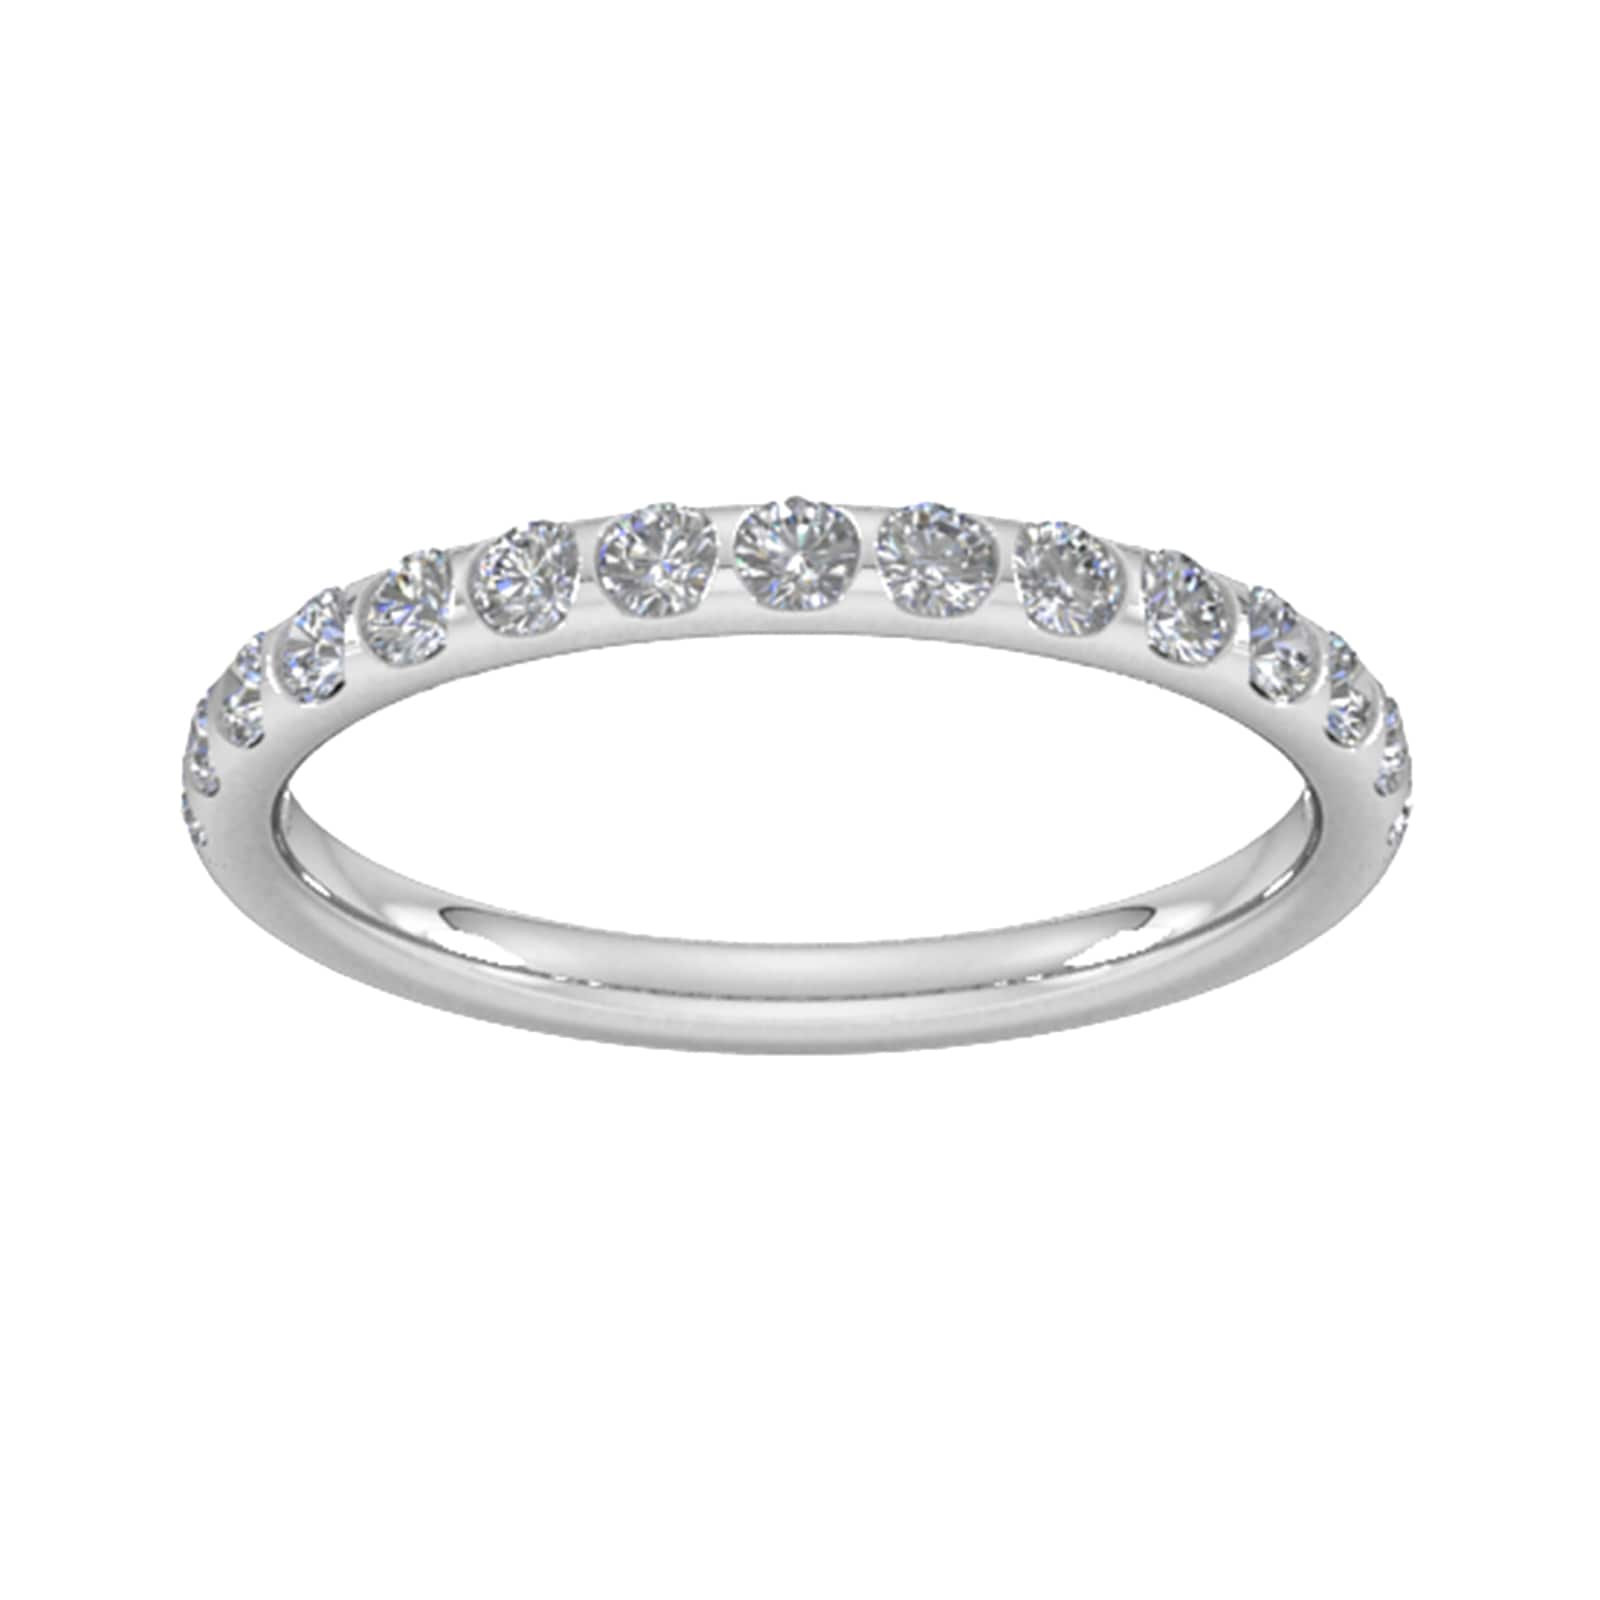 0.53 Carat Total Weight Curved Bar Brilliant Cut Diamond Set Wedding Ring In Platinum - Ring Size G